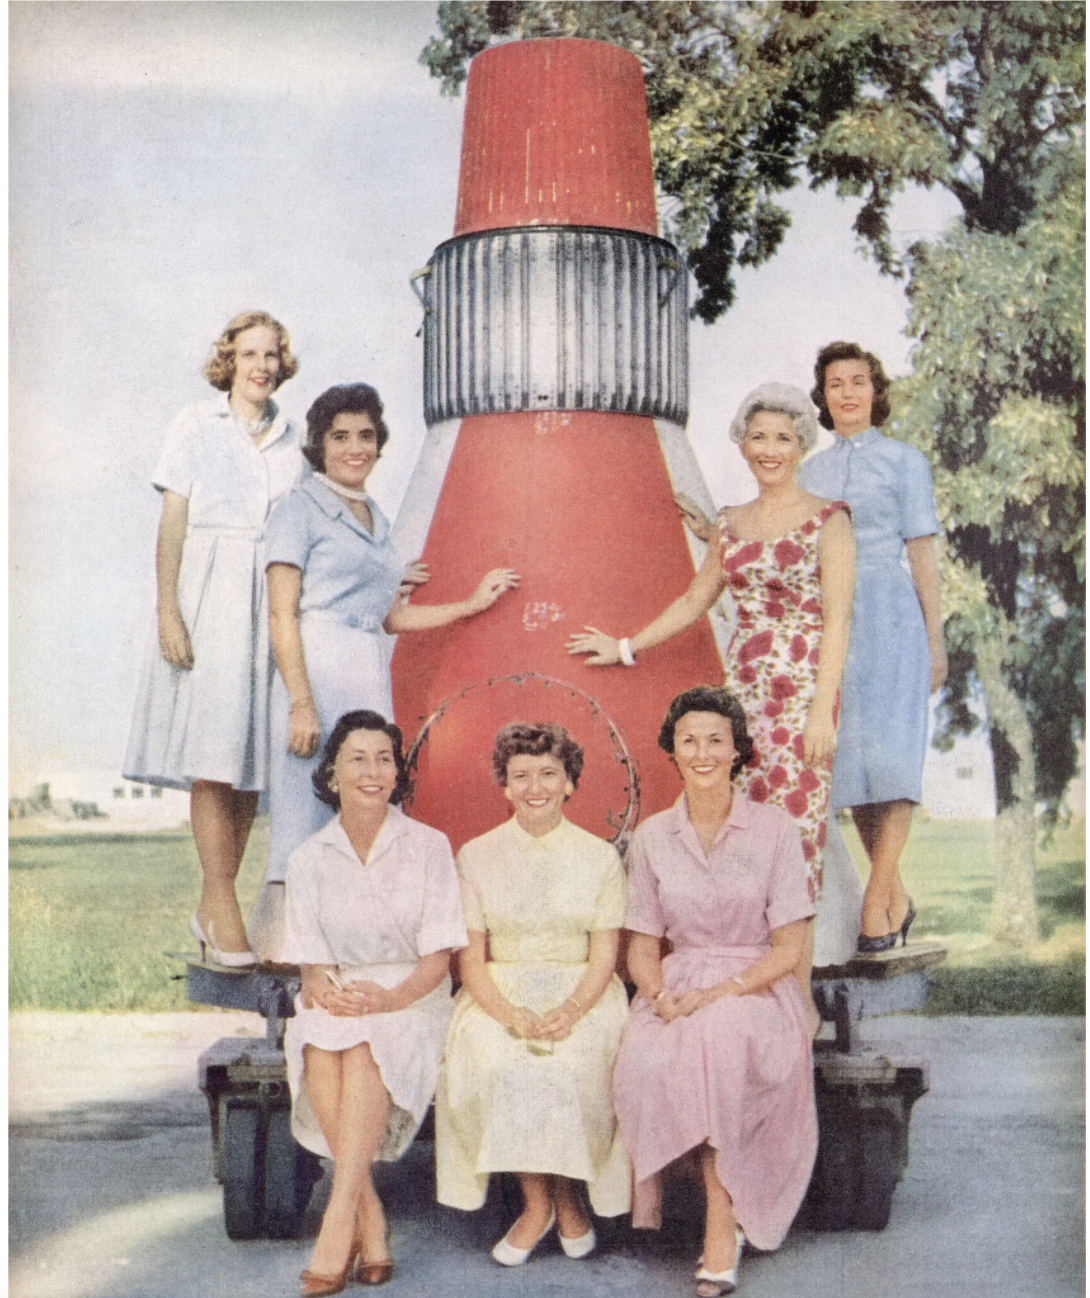 Picture of astronauts wives from Rhein's research